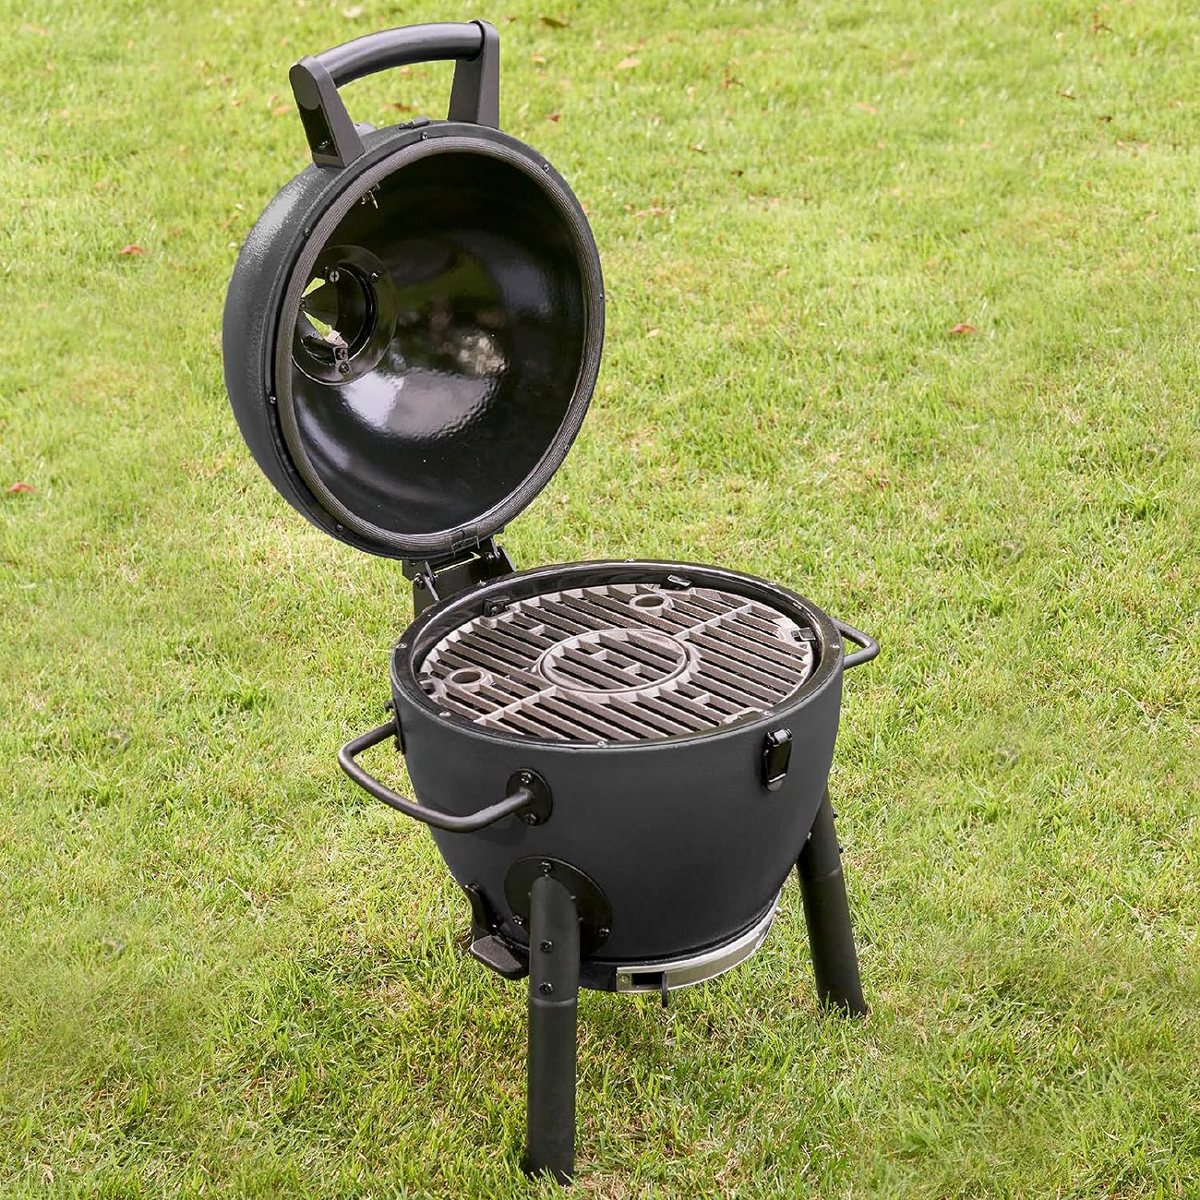 Char-Griller® AKORN® Jr. Portable Kamado Charcoal Grill and Smoker with Cast Iron Grates and Locking Lid with 155 Cooking Square Inches in Ash, Model E86714 - Barbecue Whizz...Watch My Smoke!